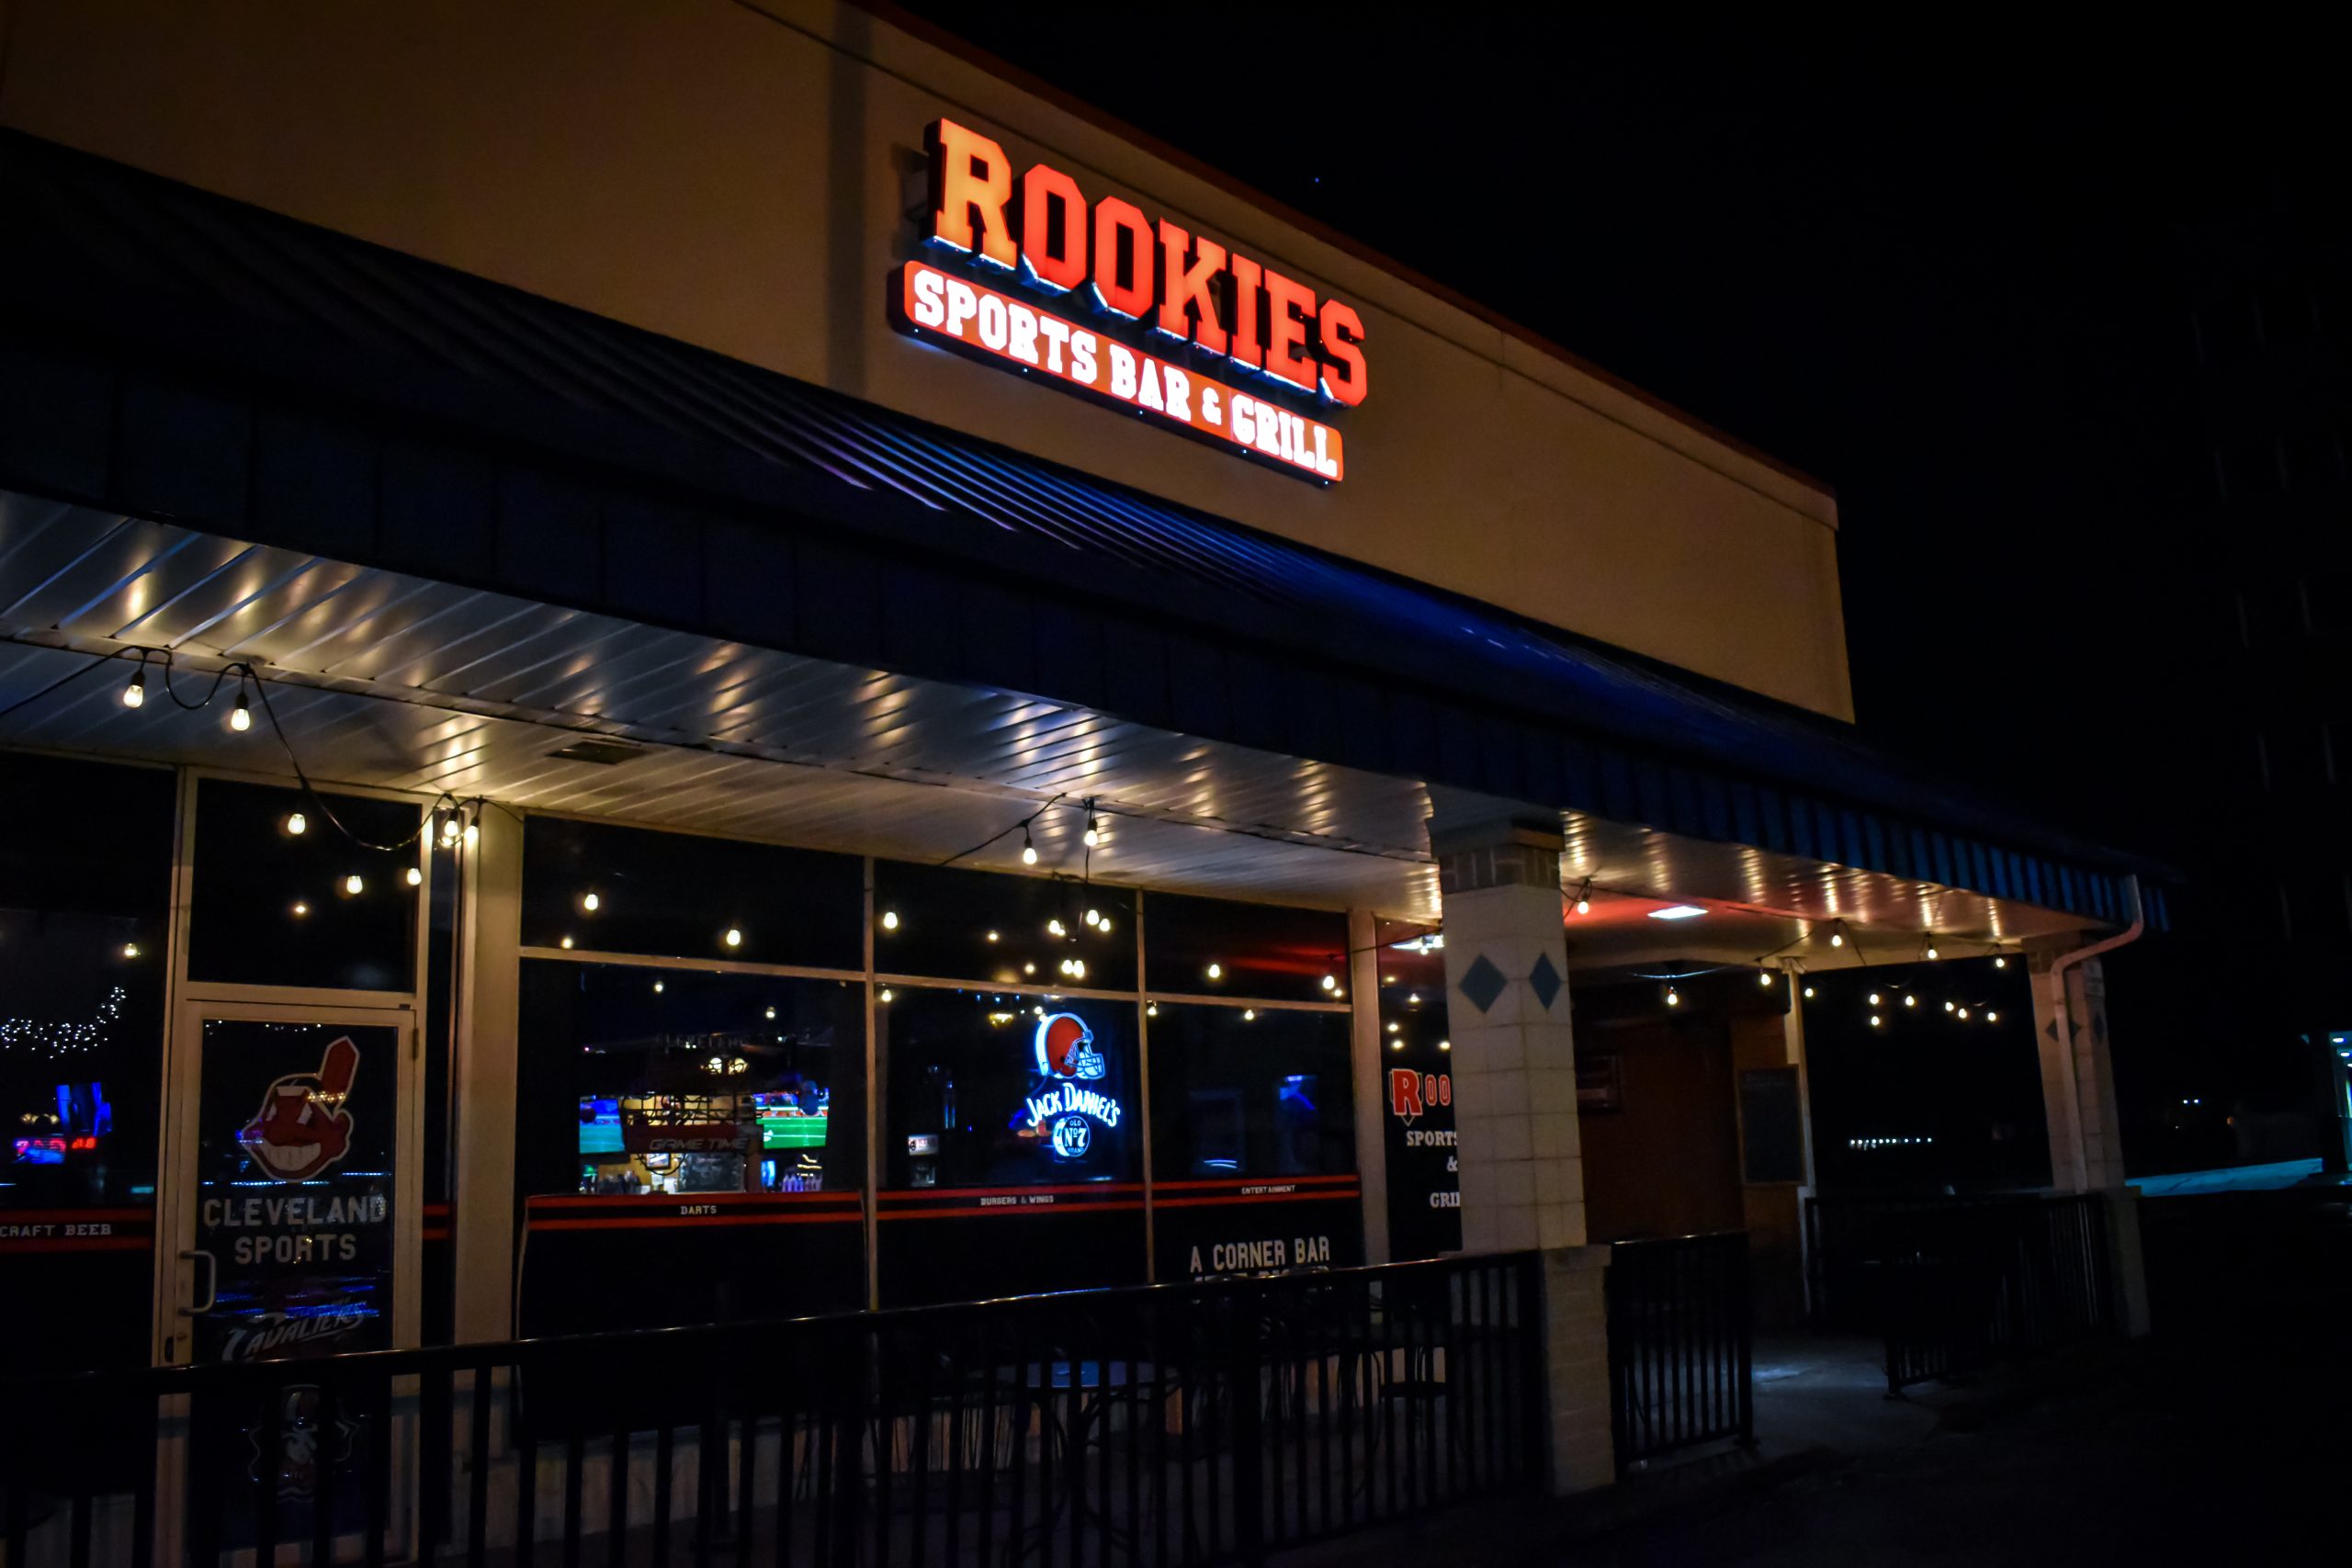 Parma Heights – Rookies Sports Bar & Grill